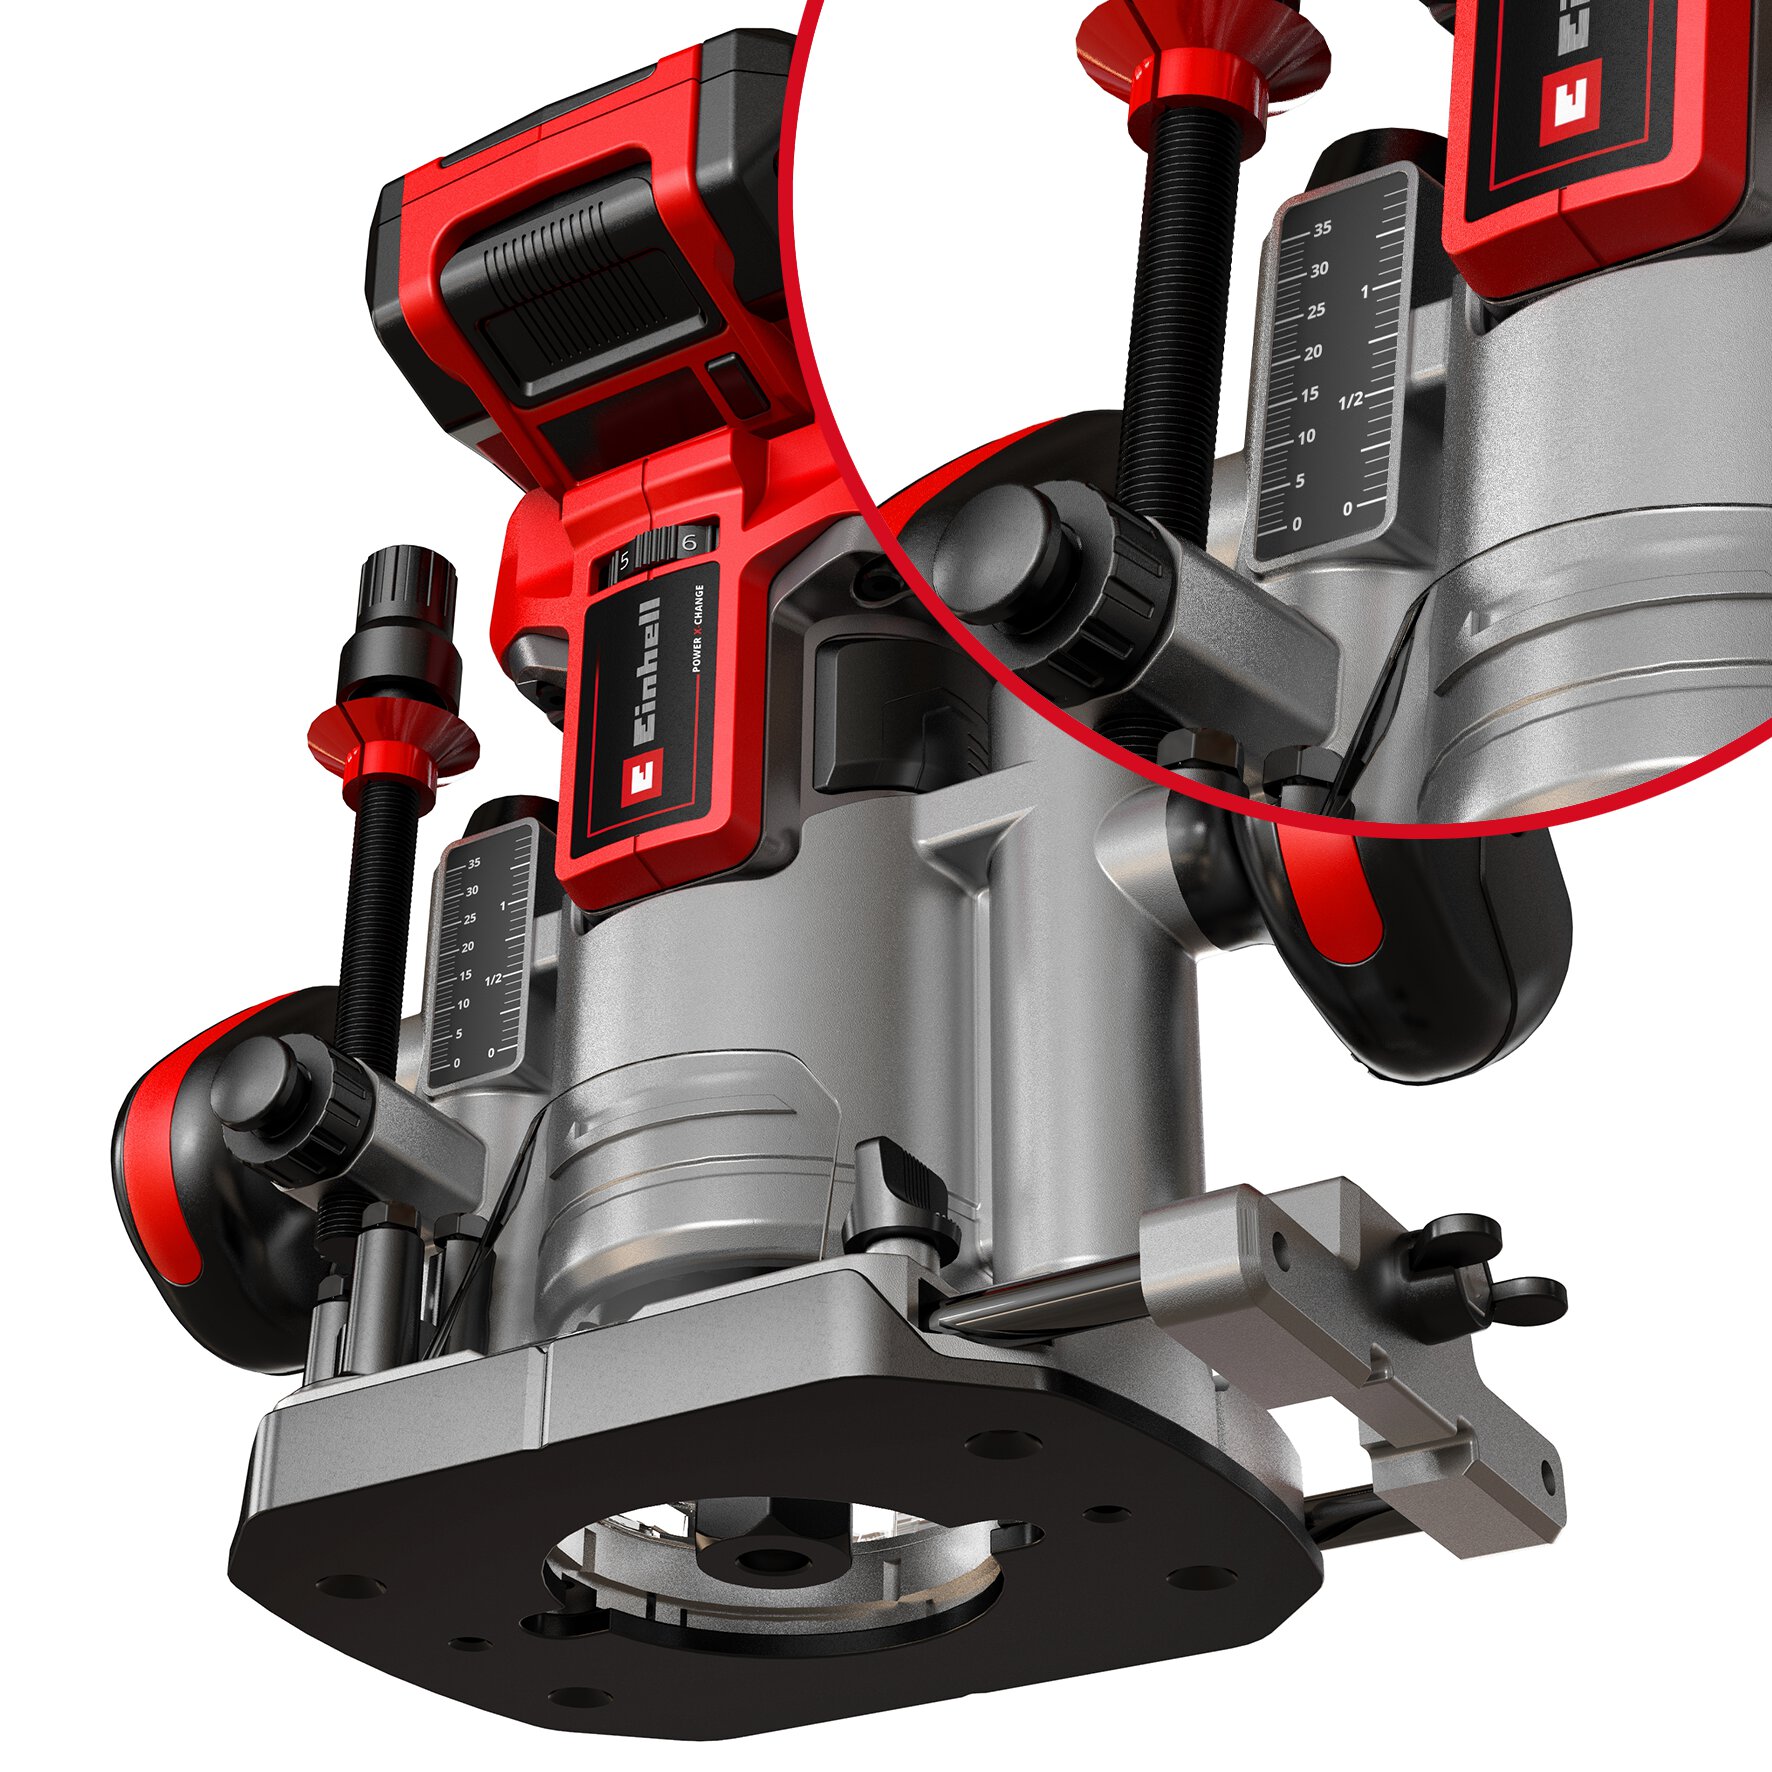 einhell-professional-cordless-router-palm-router-4350410-detail_image-005